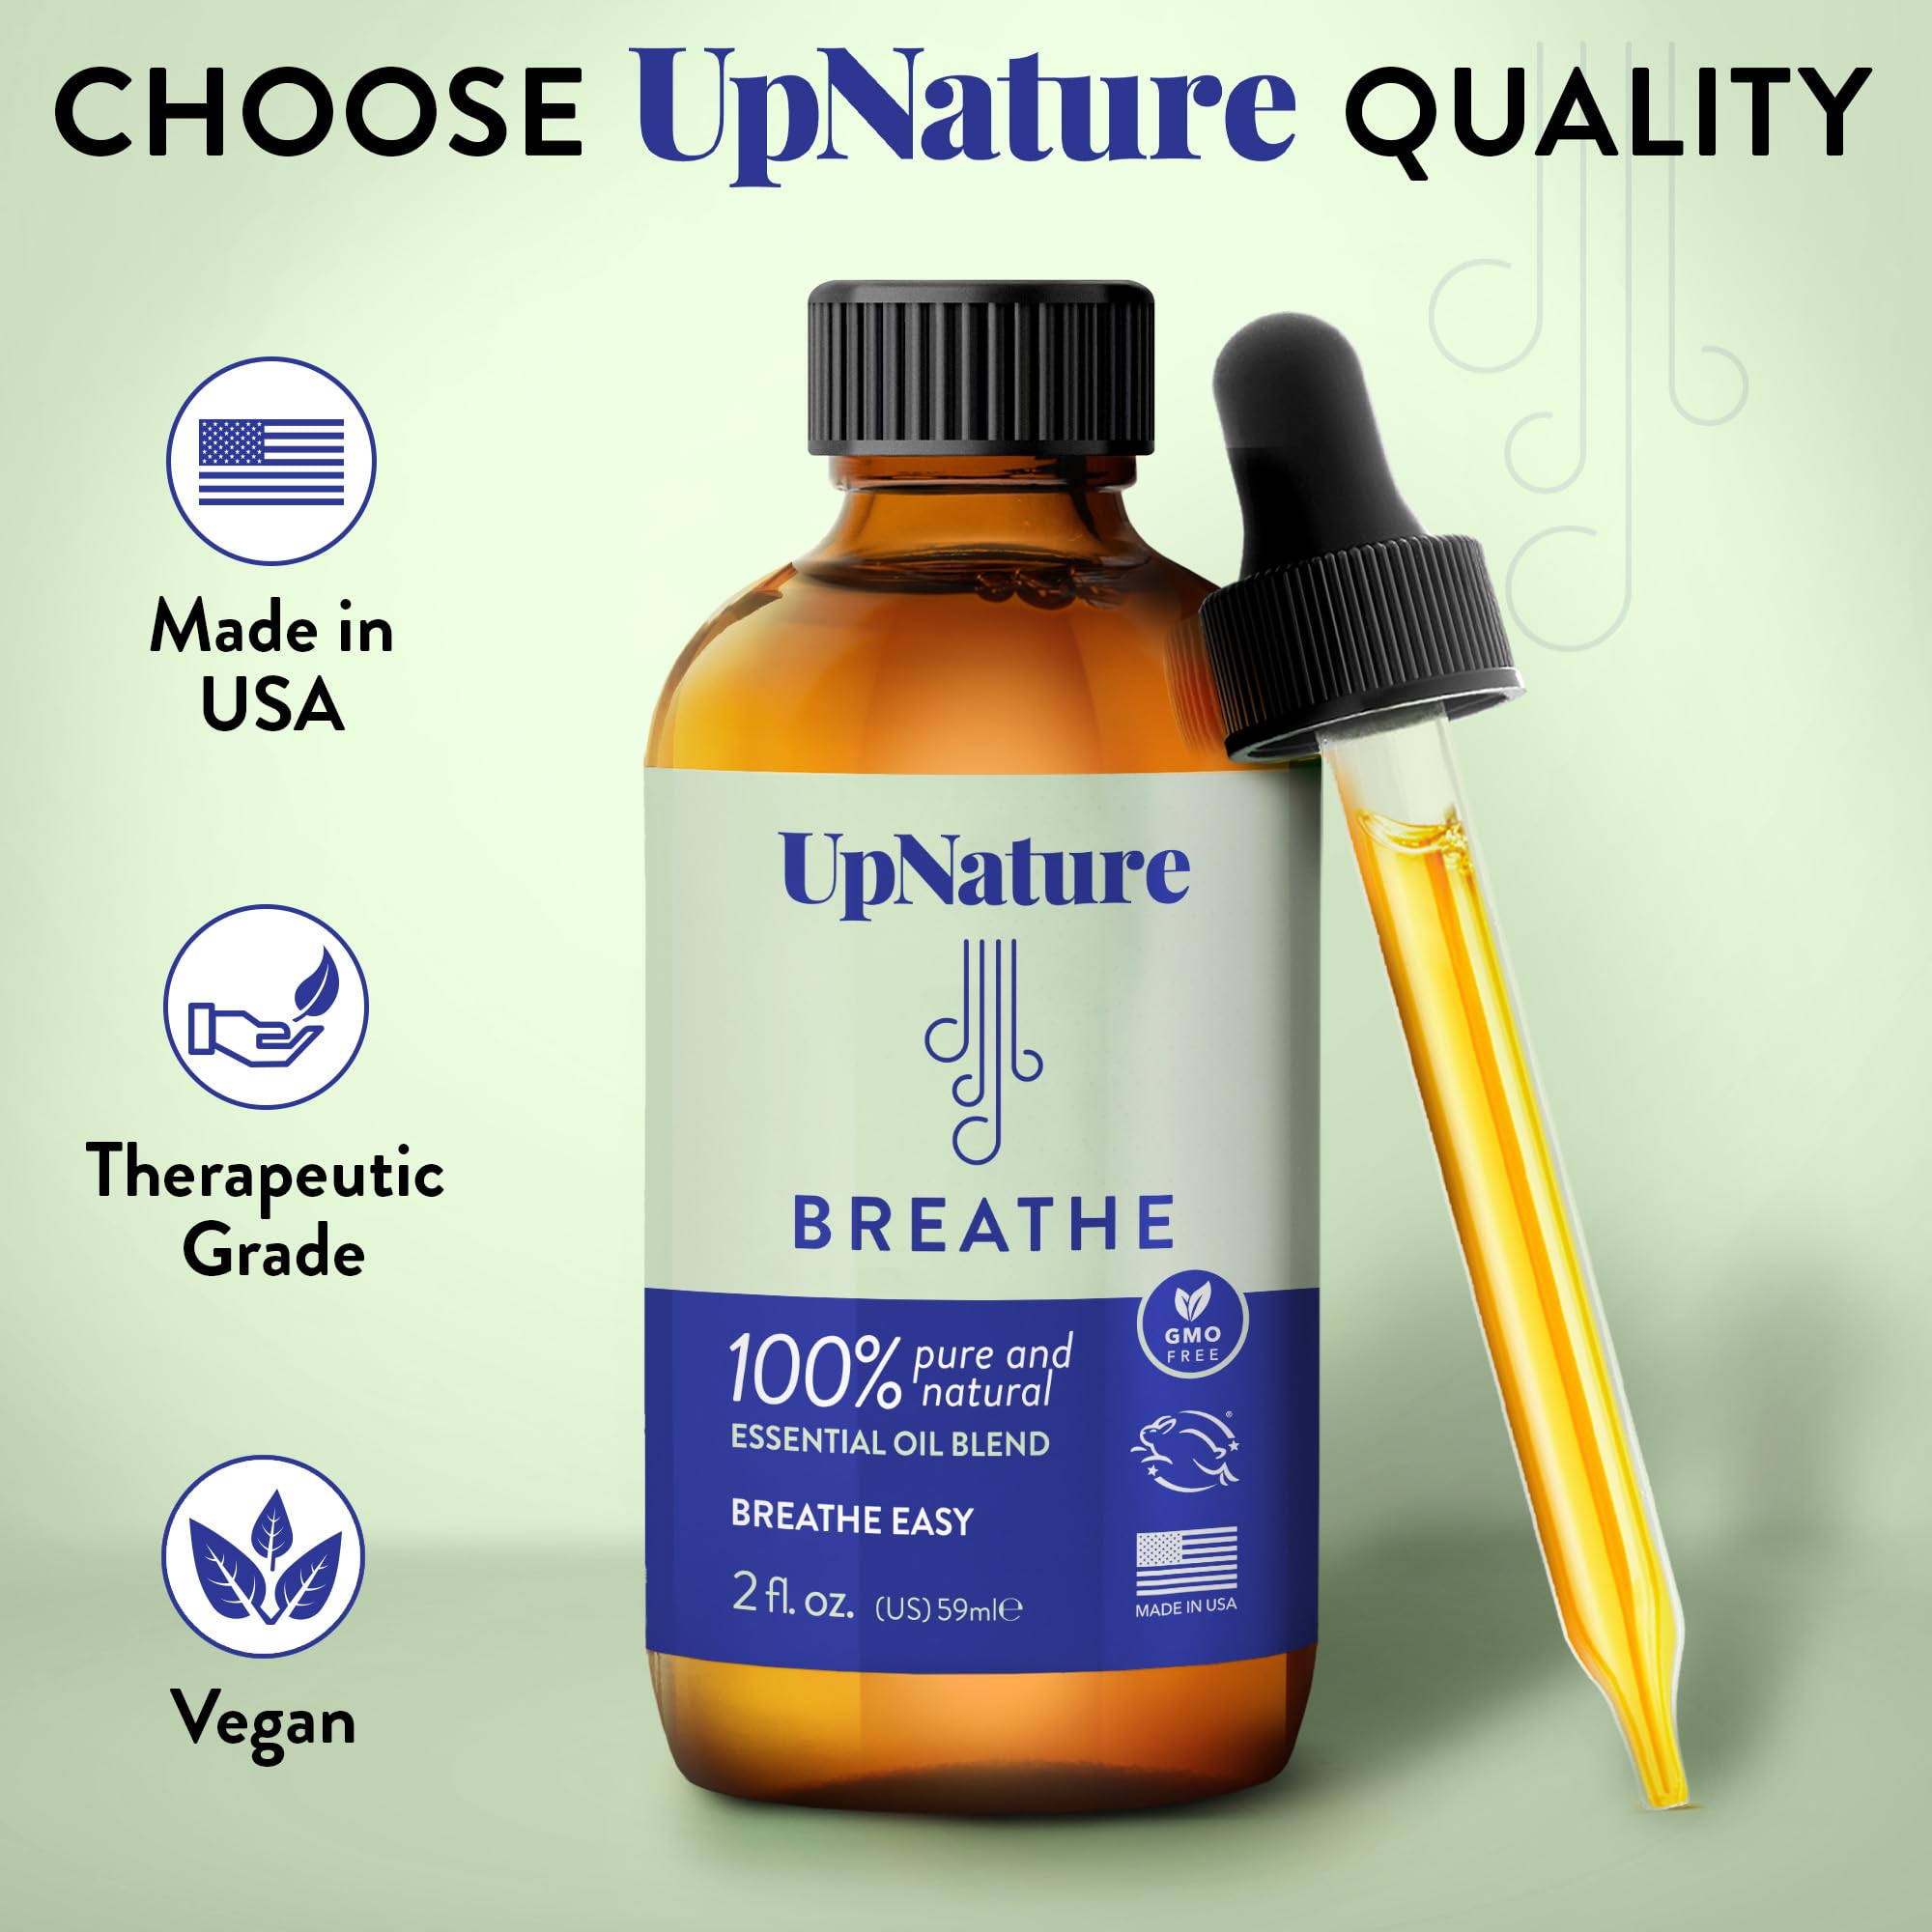 UpNature Happy Essential Oil Set Self Care Gifts - Relaxing Gifts for Women Essential Oils Gift Set - Stocking Stuffers for Women - Citrus Essential Oils - Stress Relief Aromatherapy Oils